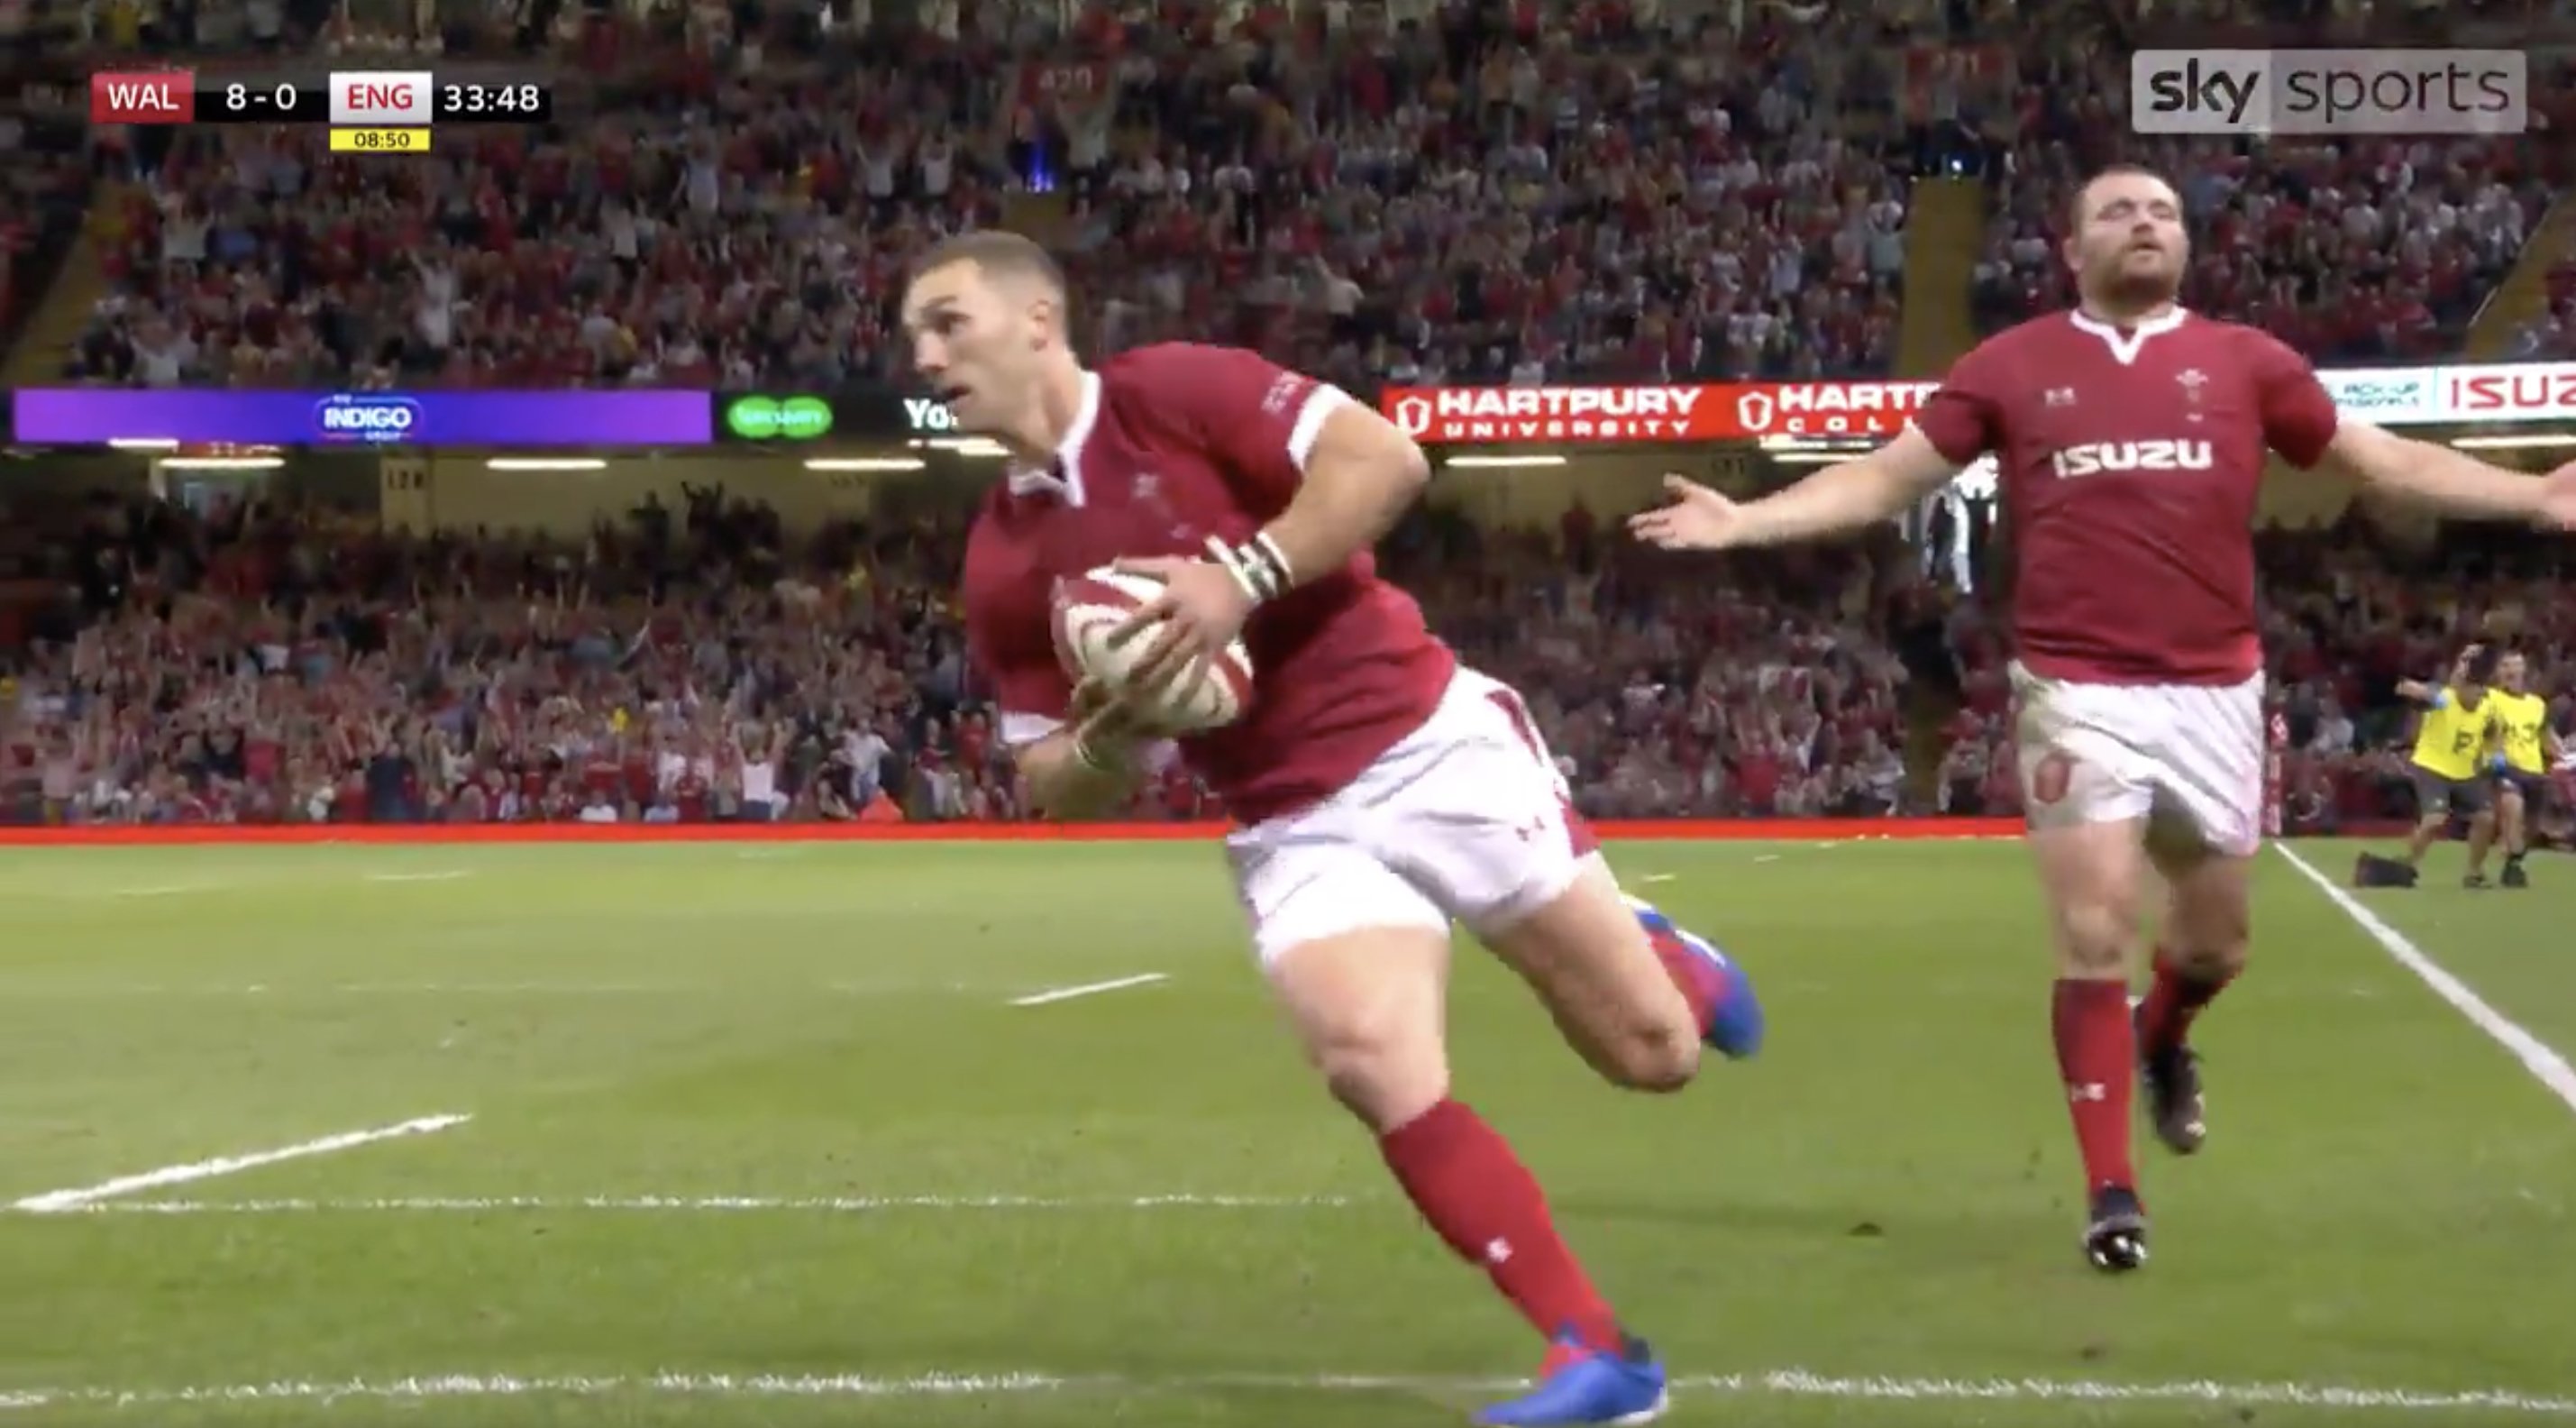 The try that secured Wales the Number 1 ranking in World Rugby